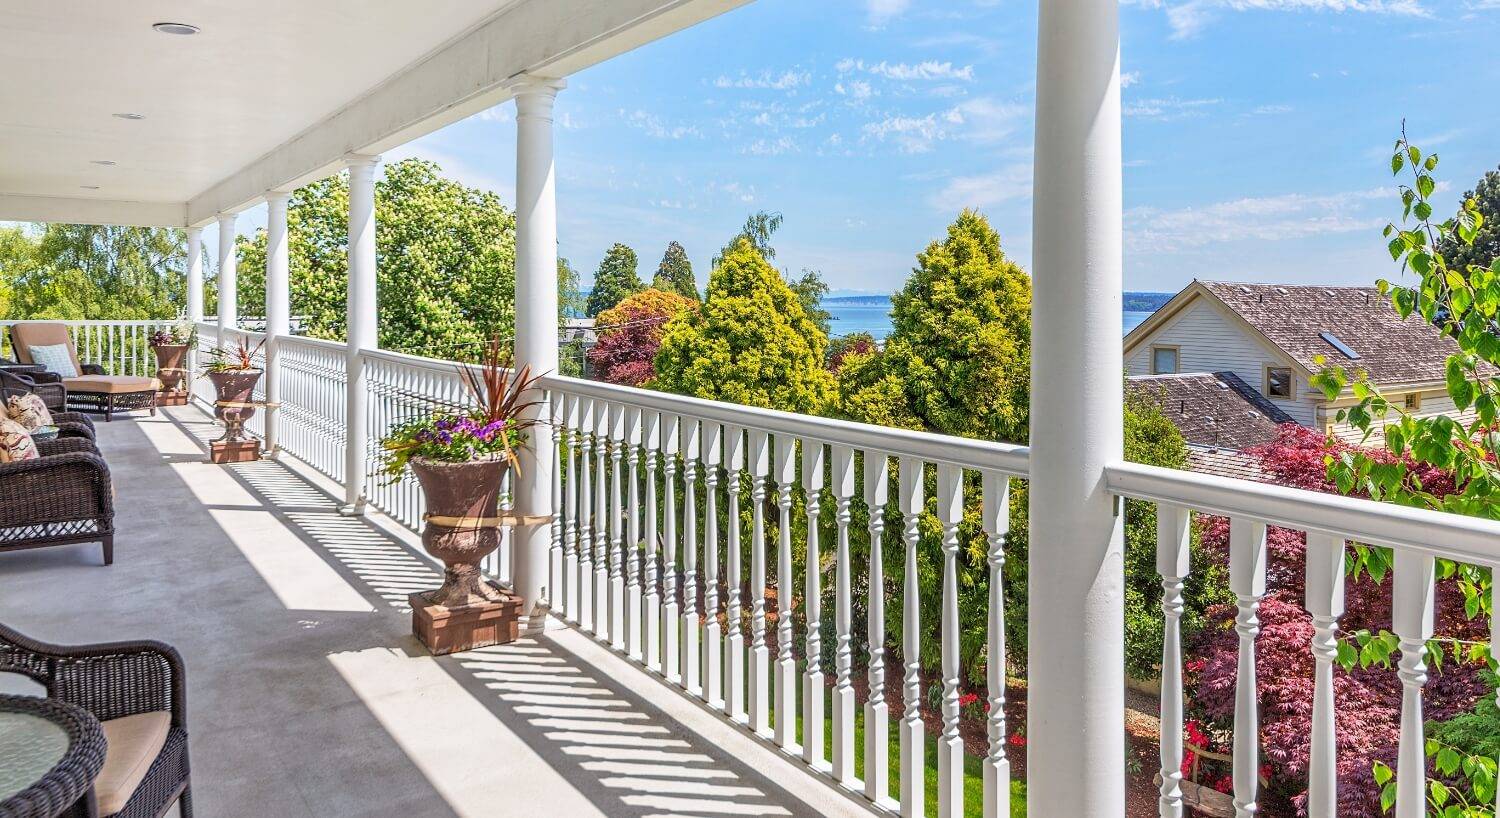 A sweeping second floor porch with wicker furniture, several planters with flowers, white railings and columns, trees, a house, and the ocean in the background.